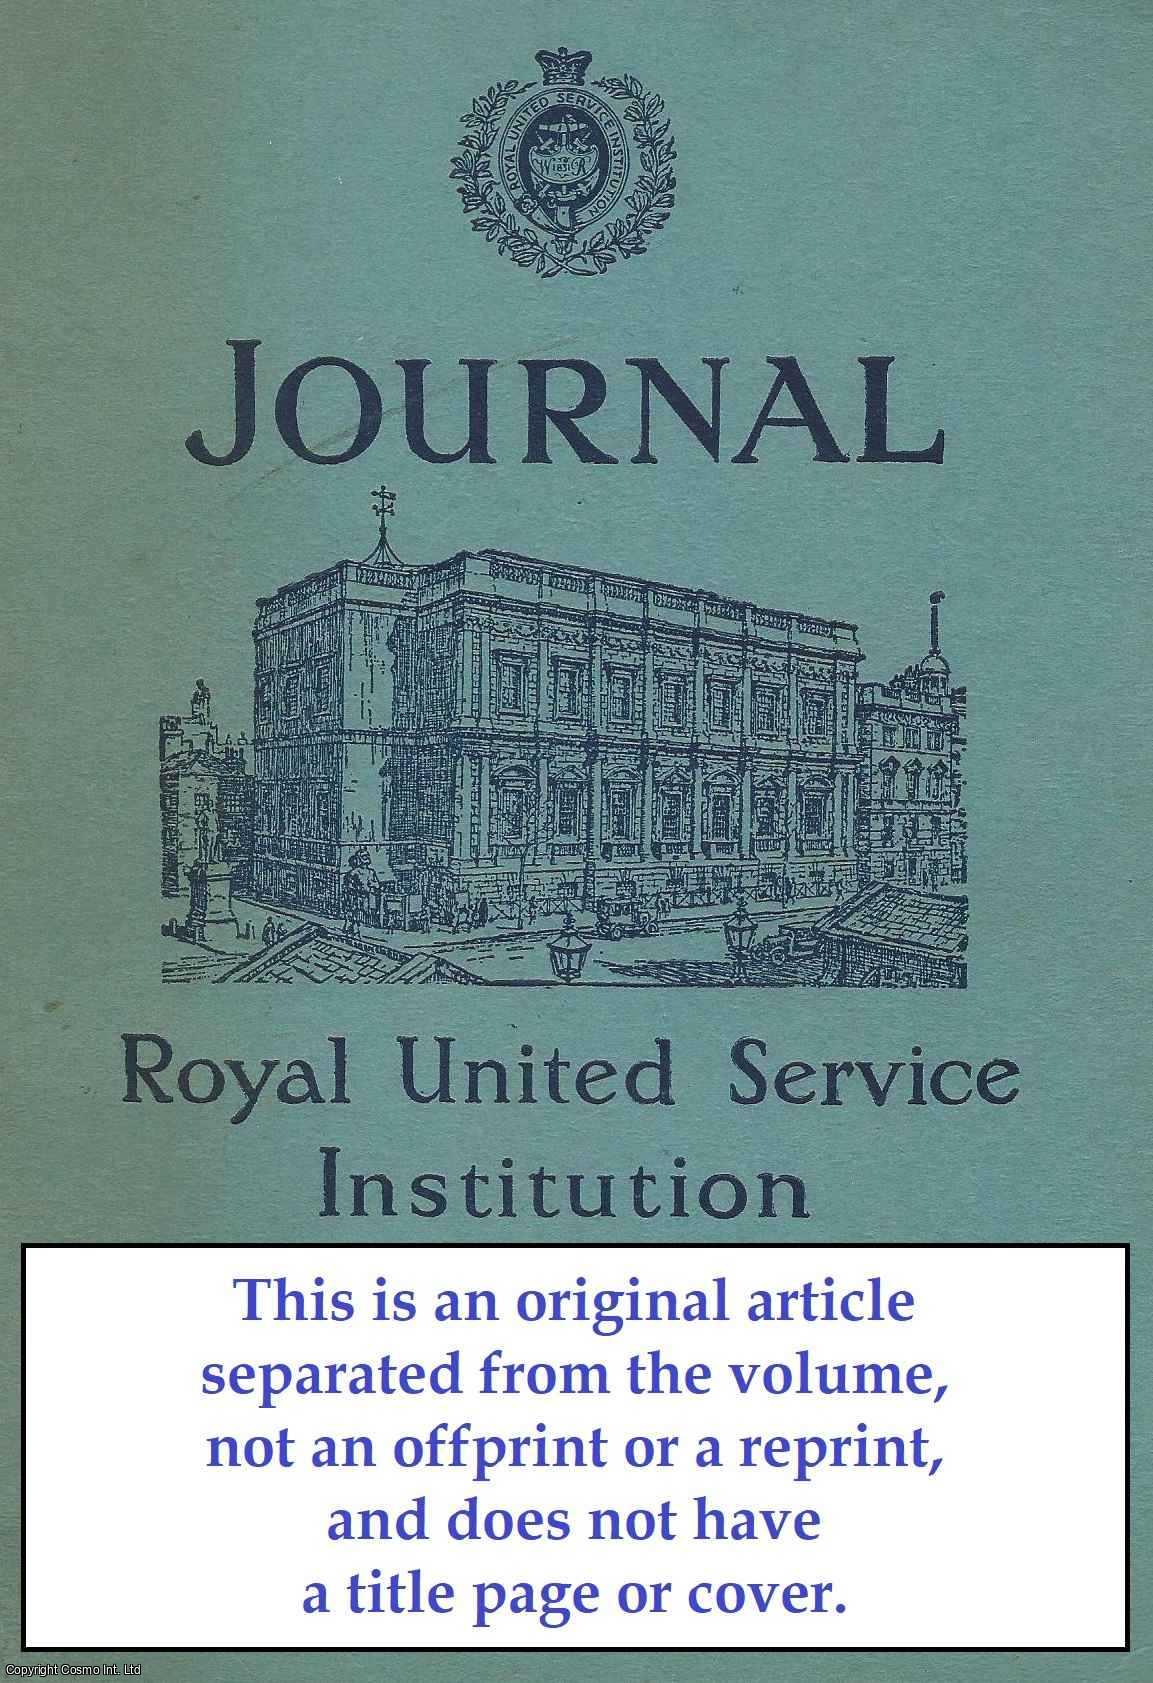 John Erickson - Sino-Soviet Relationships - II: The Foundation of an Alliance. An original article from Journal of The Royal United Service Institution, 1960.